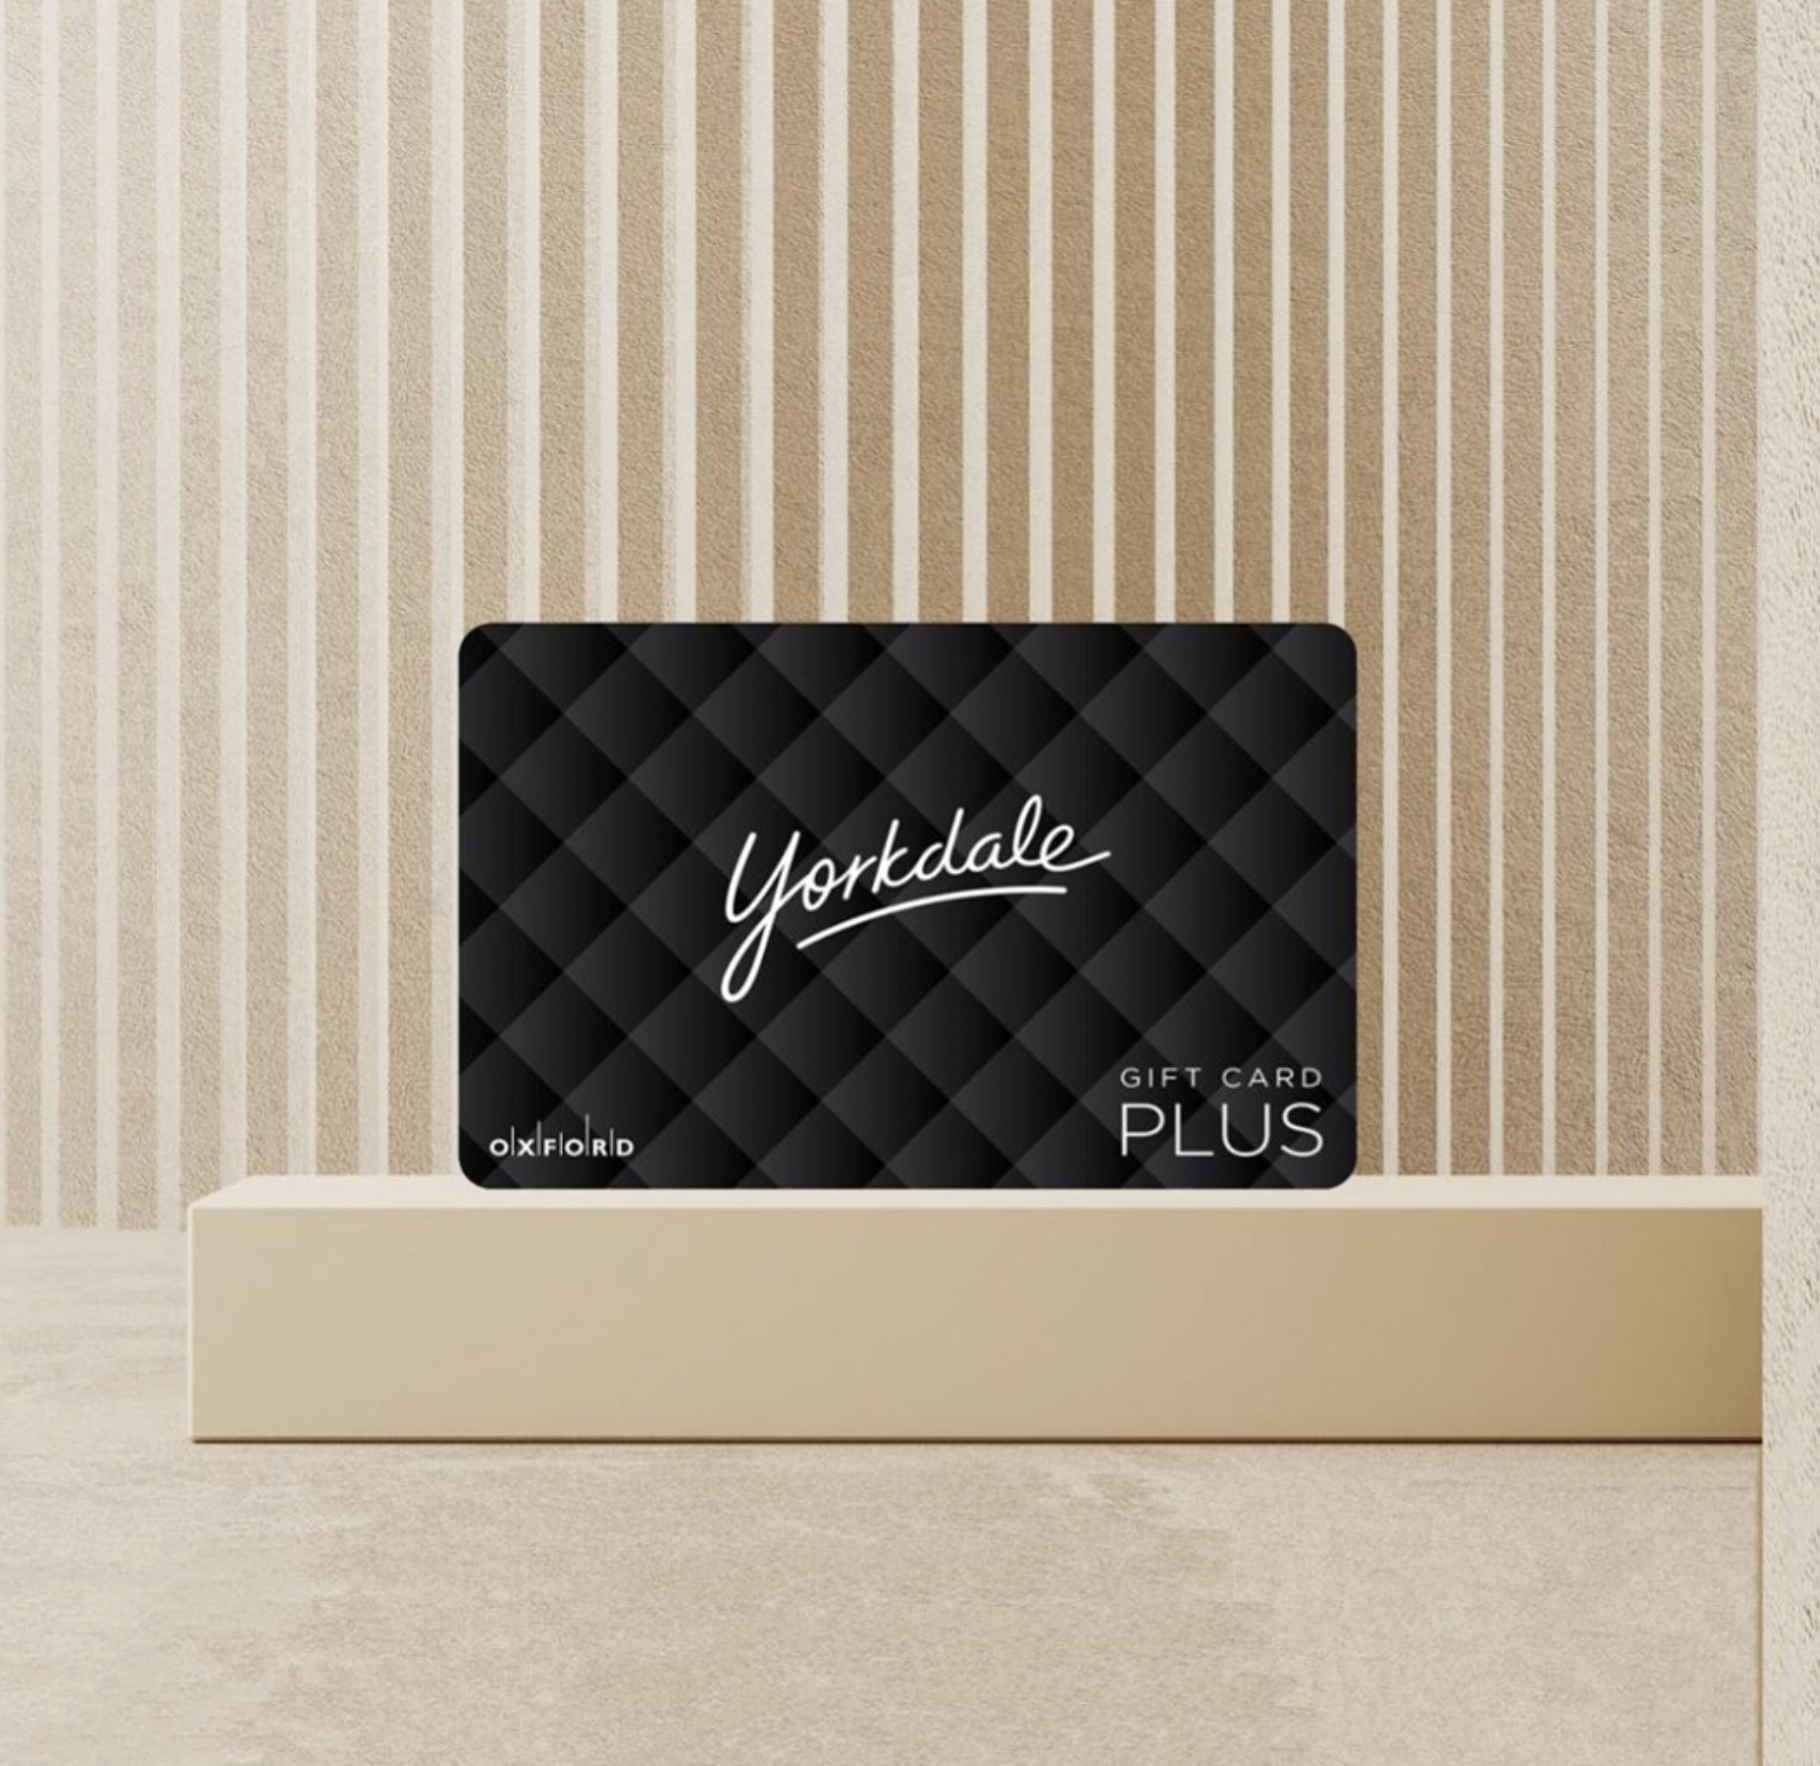 Image of a black Yorkdale gift card